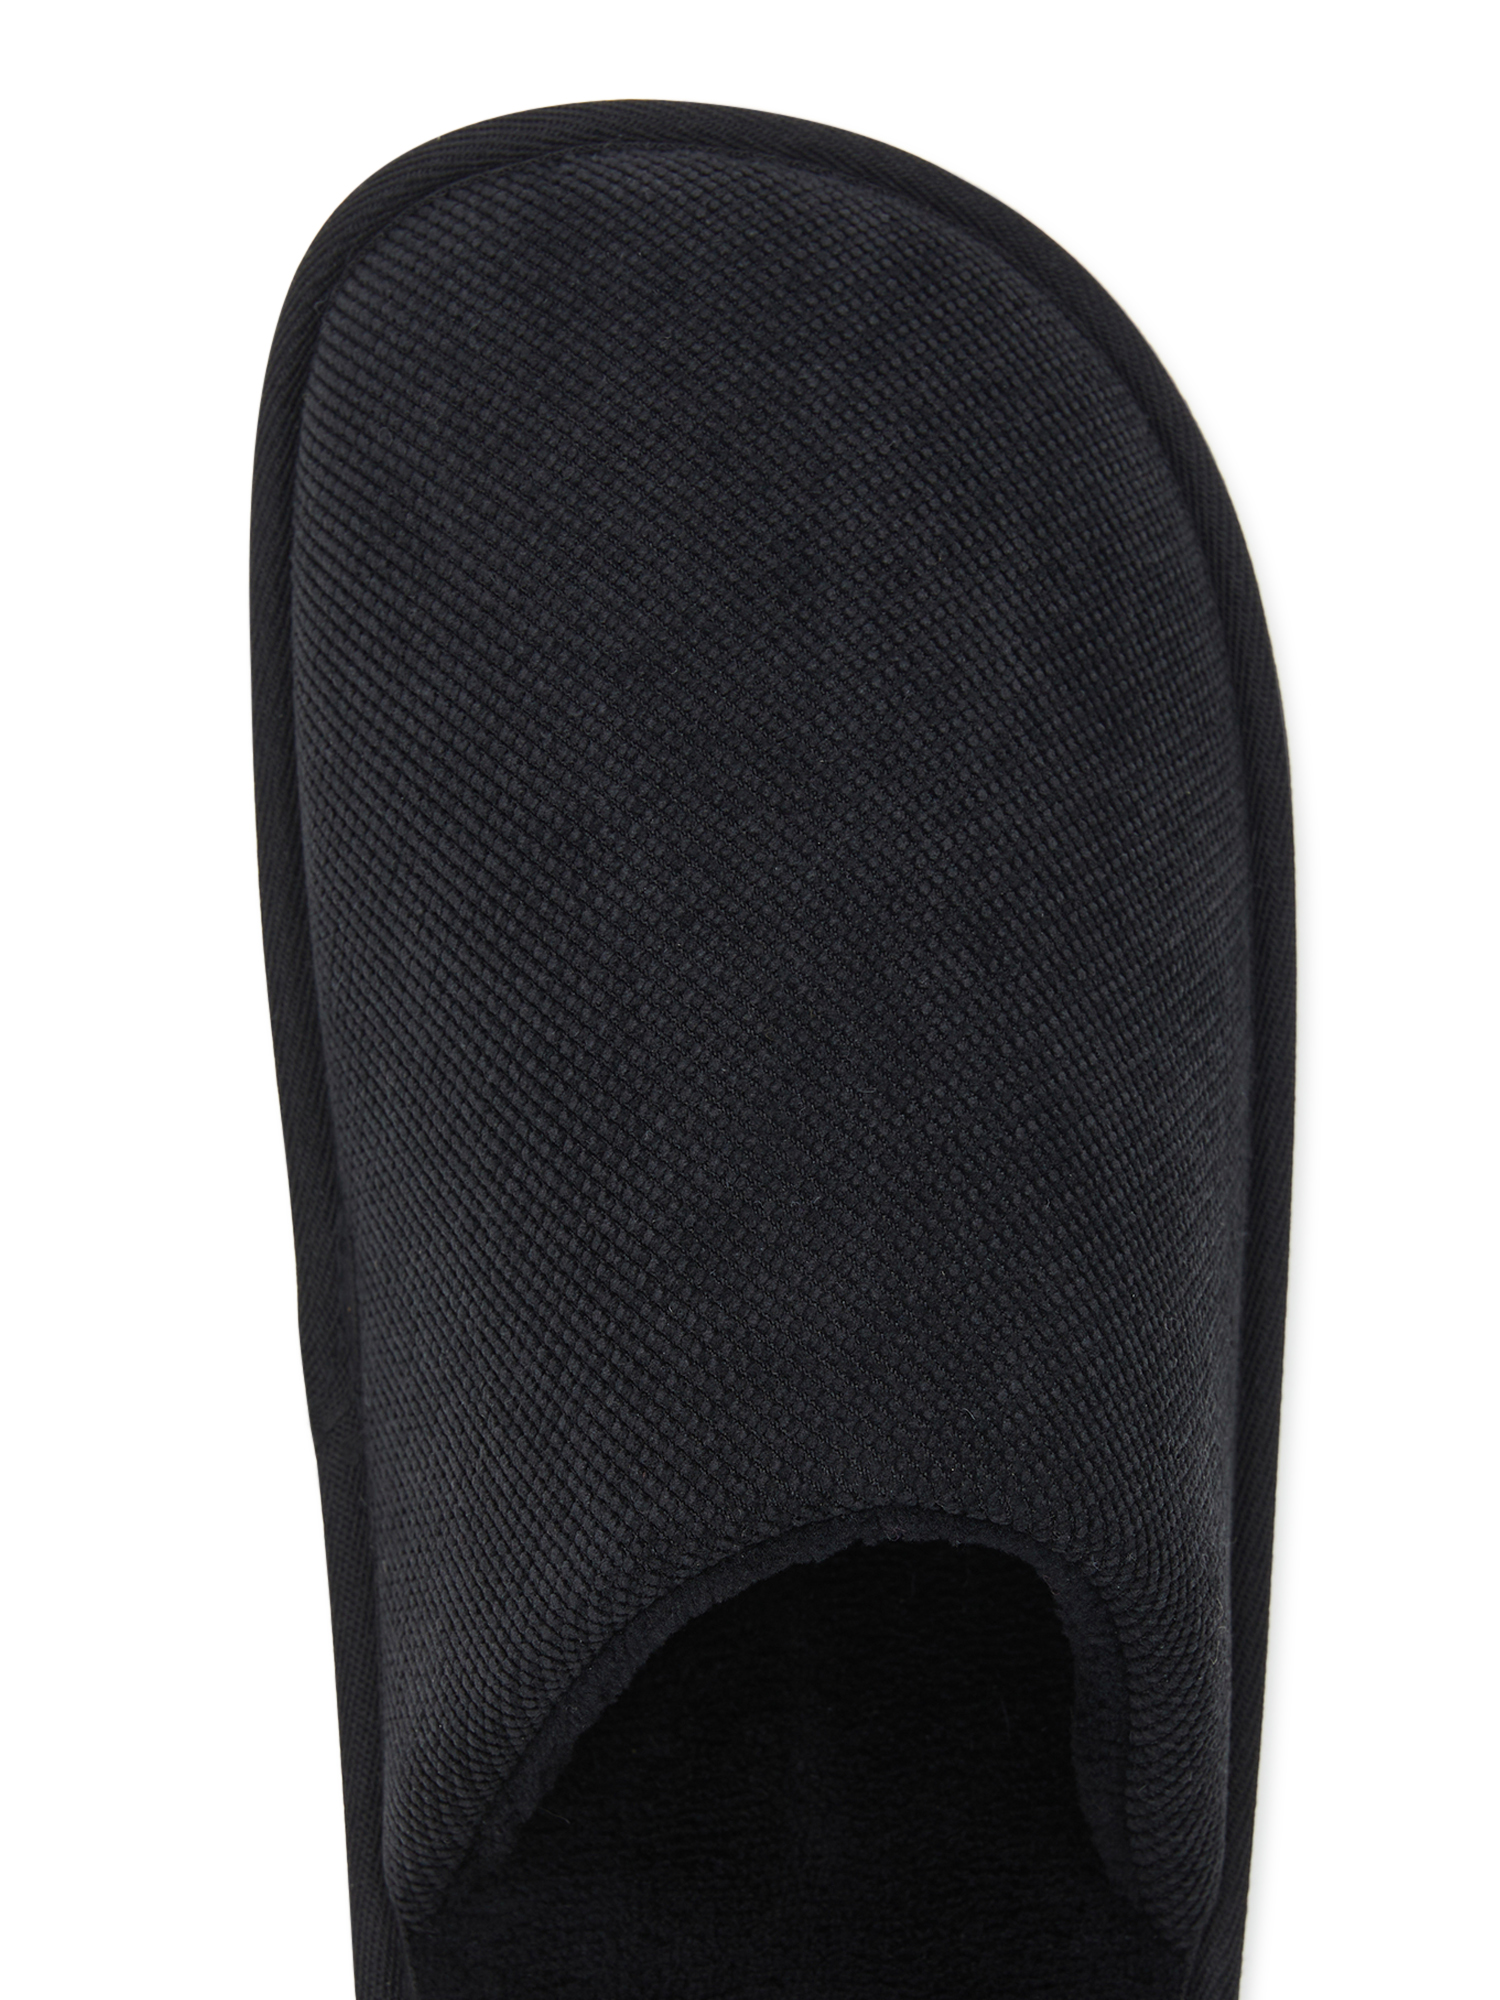 George Men's Casual Scuff Slippers - image 4 of 4